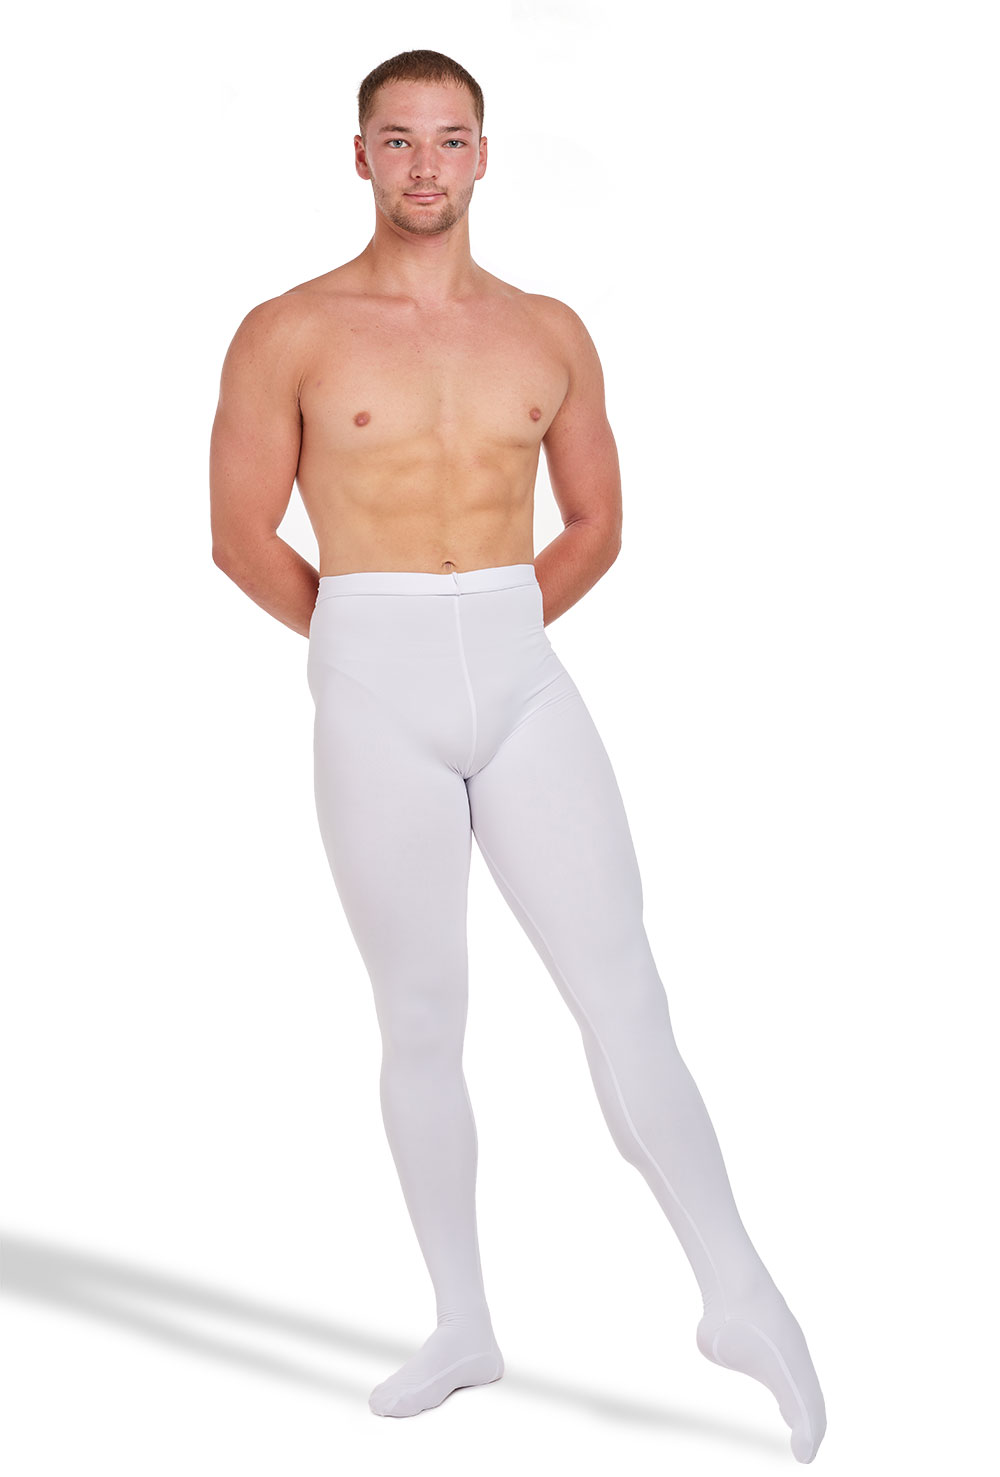 Buy Wear Moi Orion - Heavyweight Men's Footed Tights with High